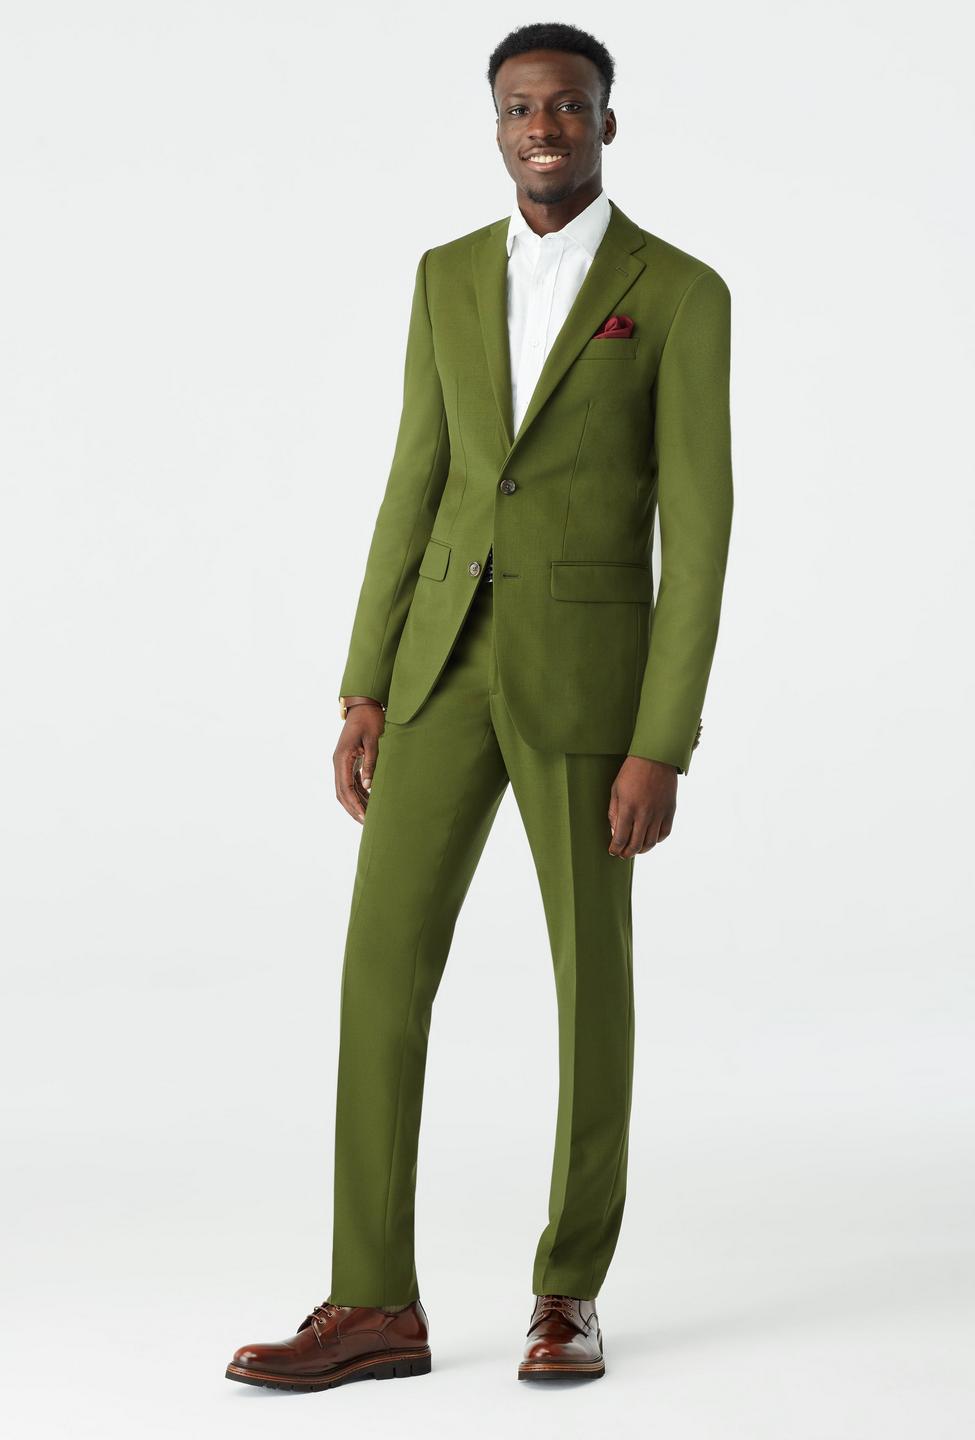 How to wear a suit casually | Tailor made suits, Green suit men, Green suit